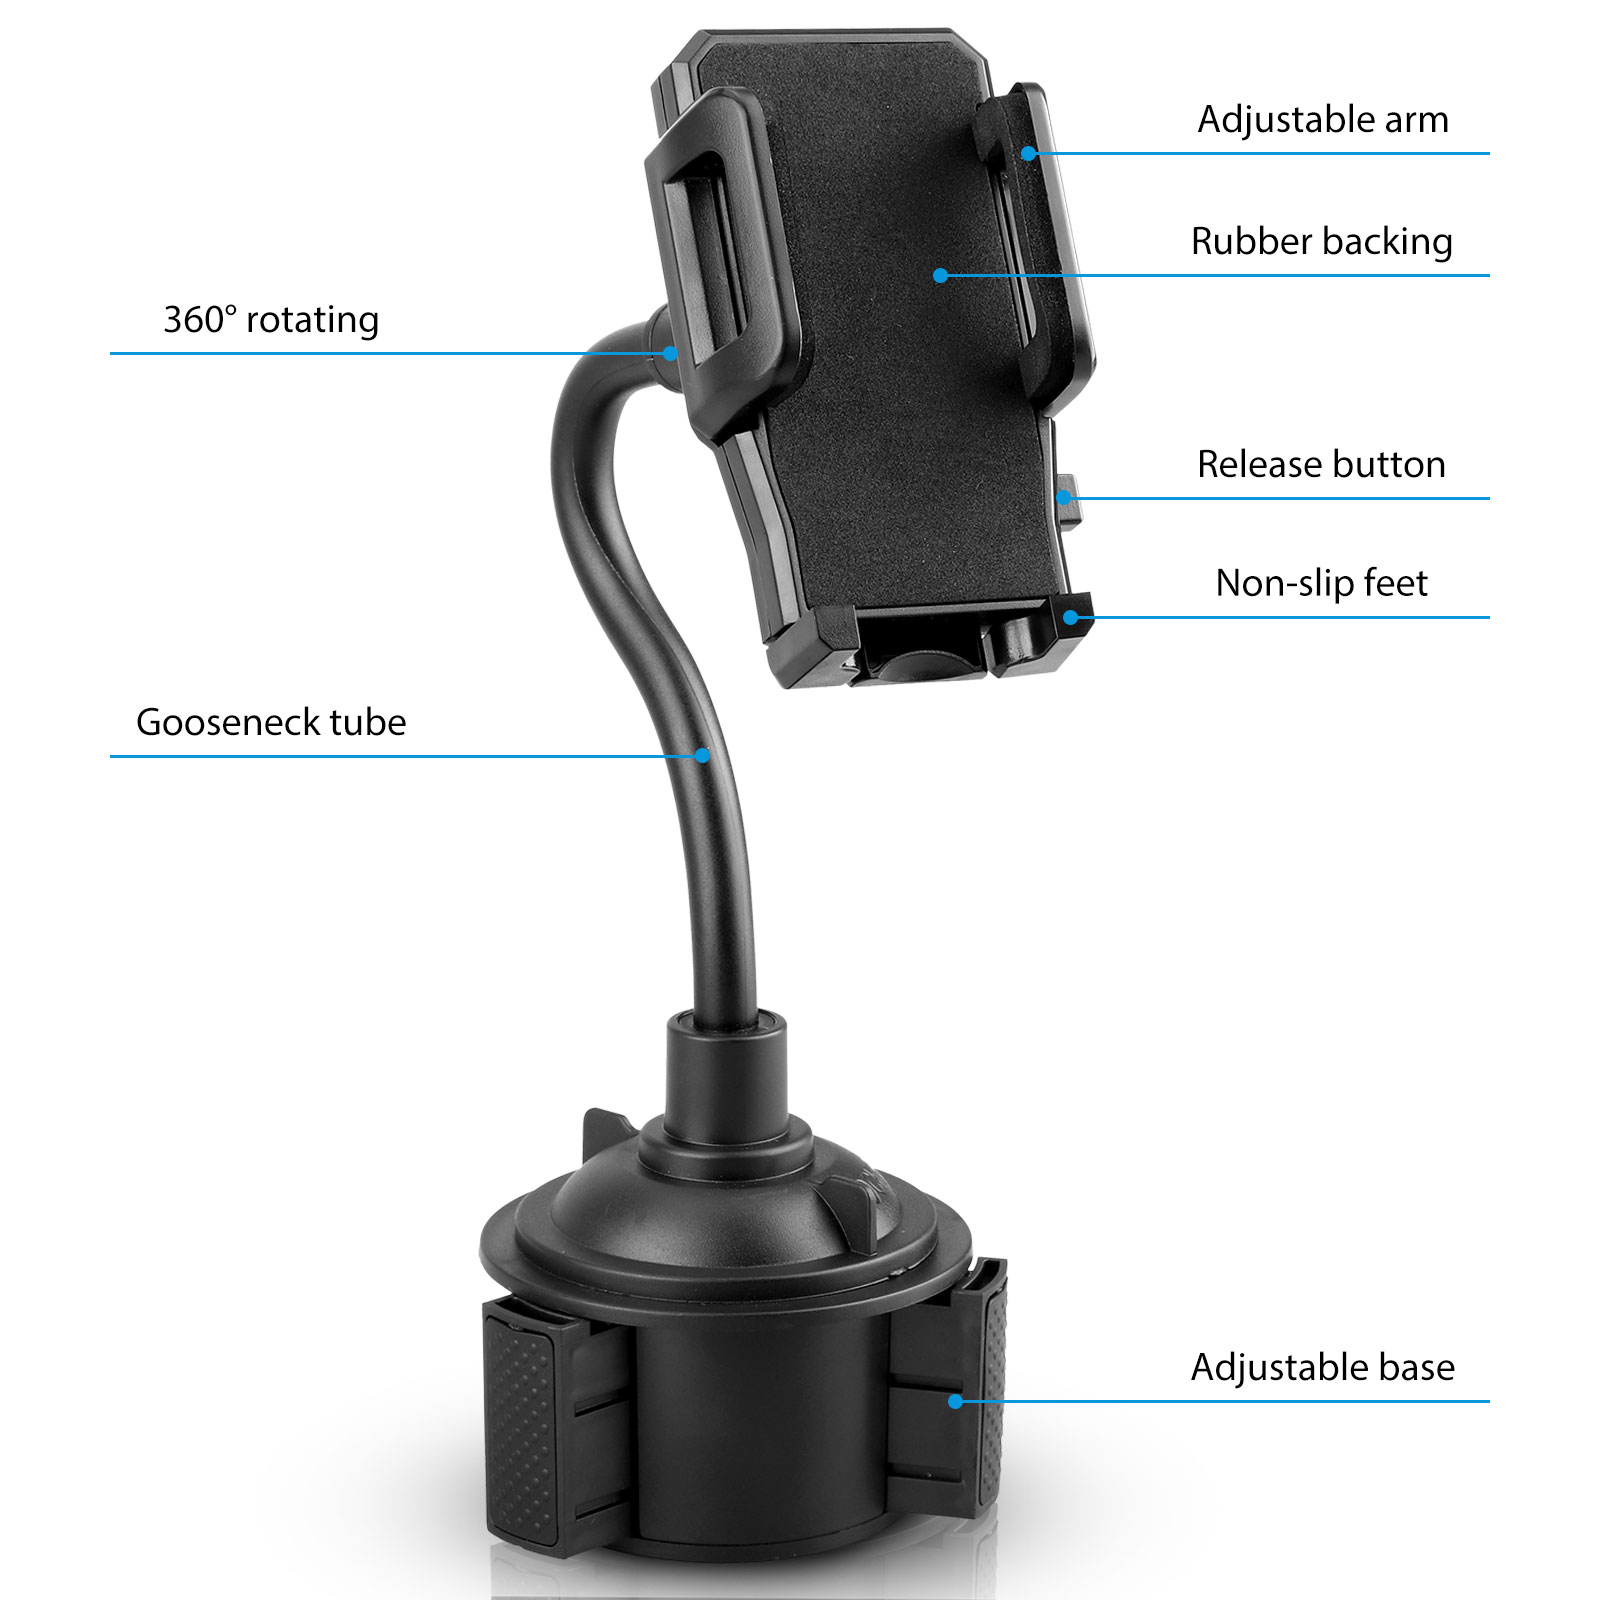 Car Phone Mount, EEEkit Universal Cell Phone Holder, Car Cup Holder Mount Fit for iPhone 13 12 Pro Max 11 Xs Max R X 8 Plus, Samsung Galaxy S21 S20 S10 and More - image 4 of 11